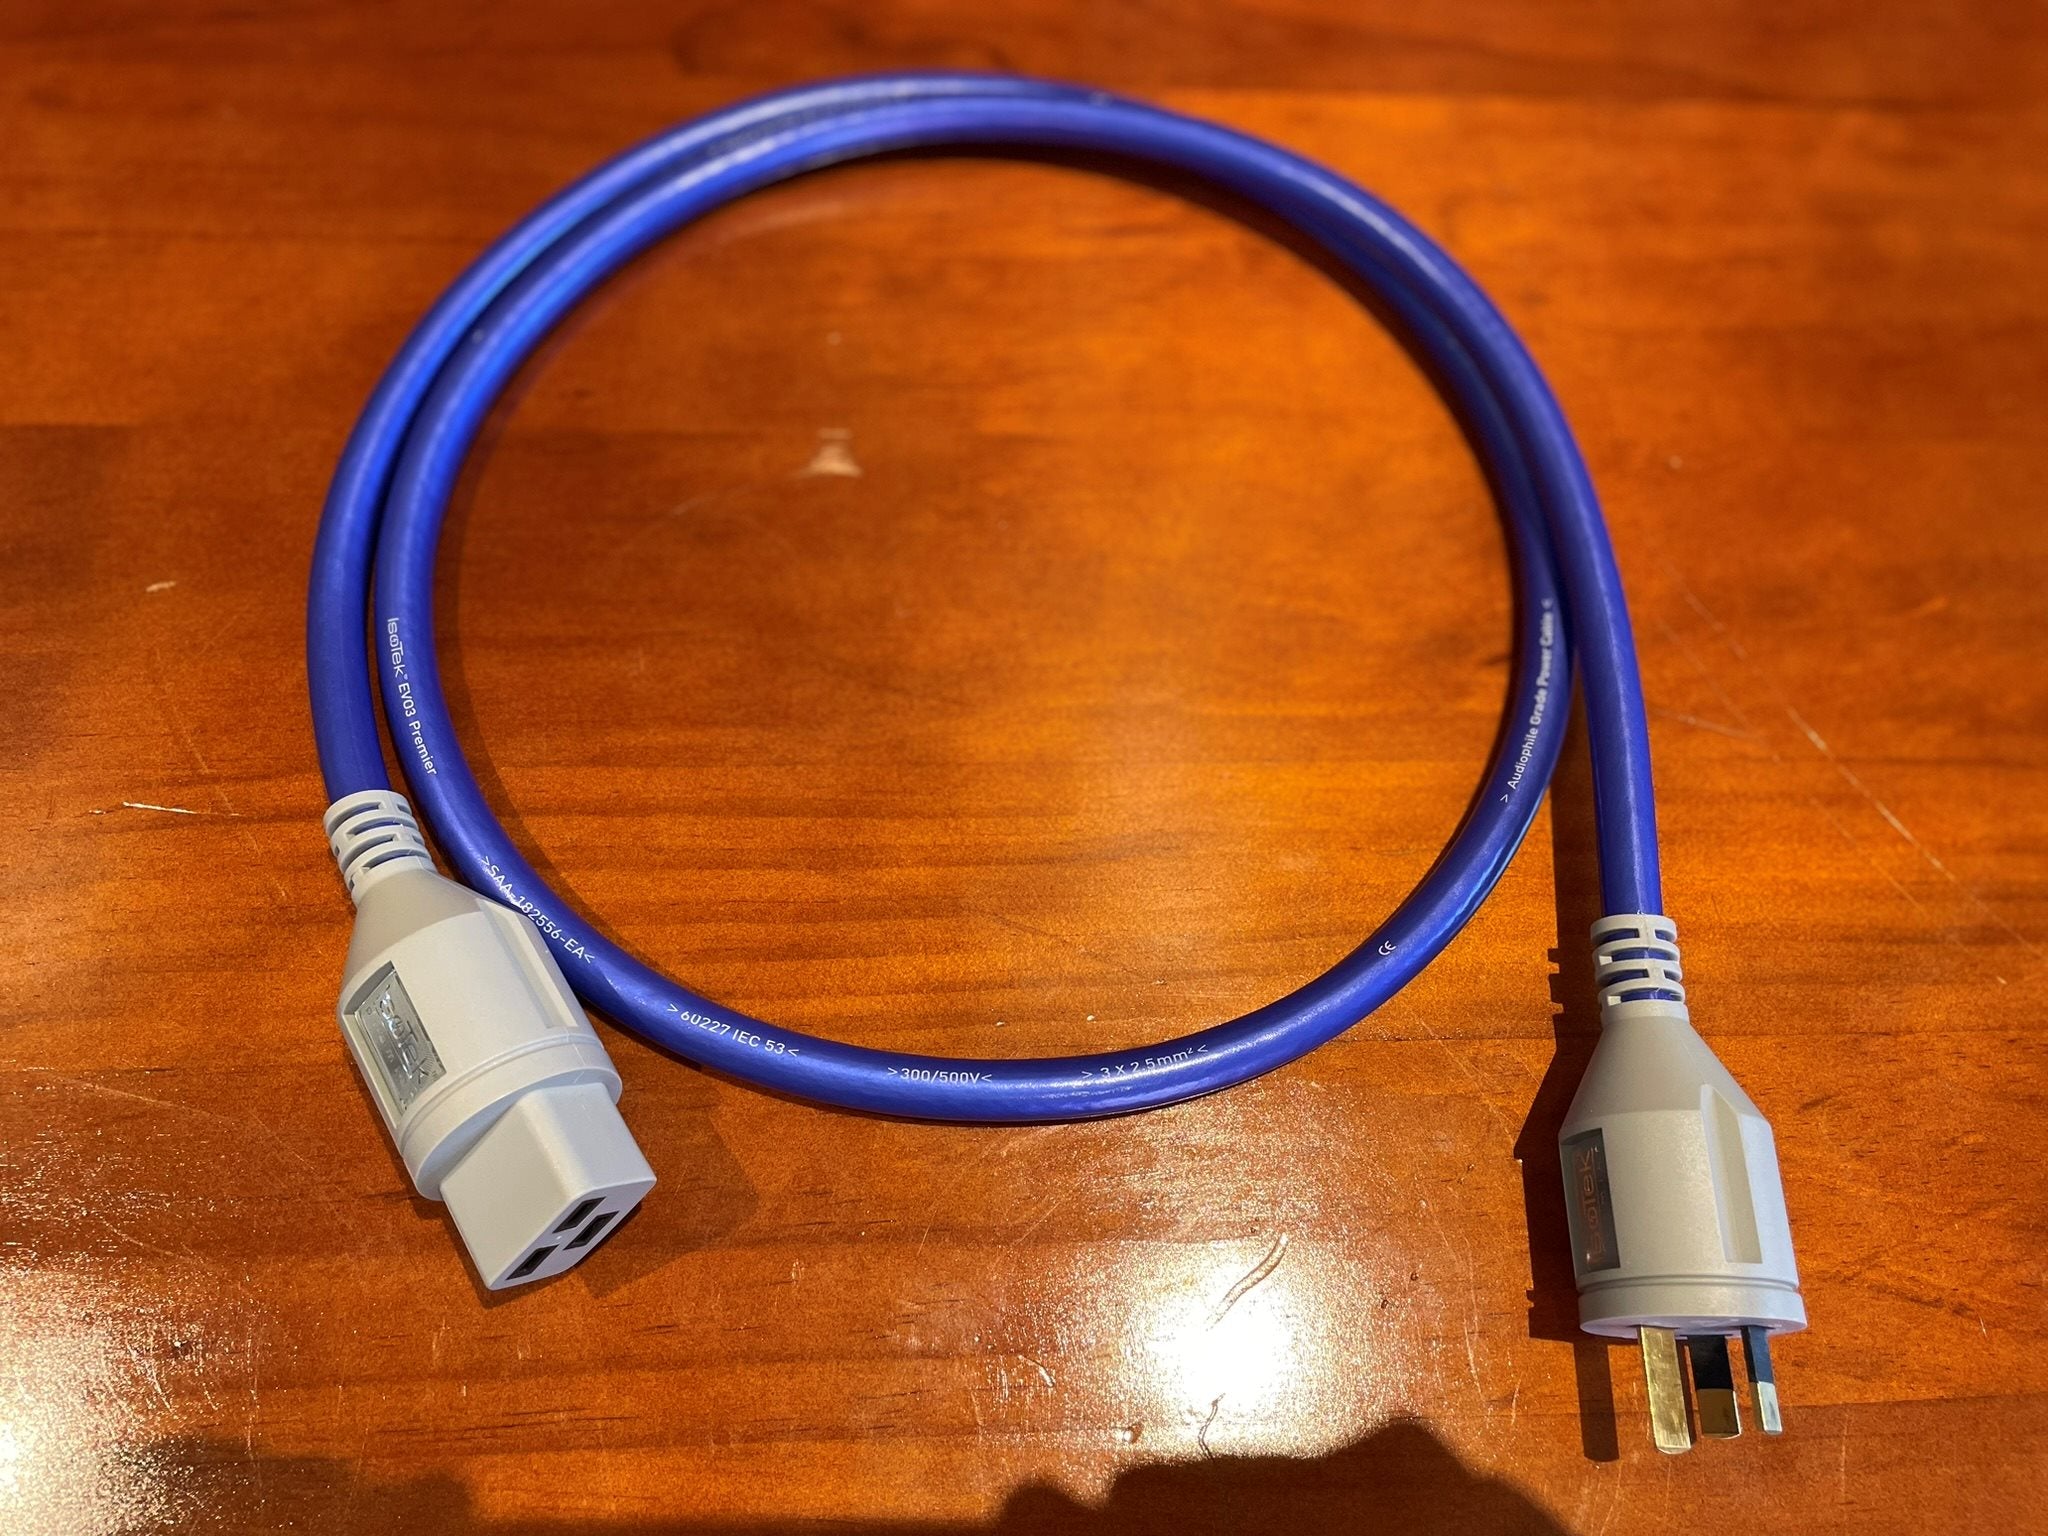 IsoTek Evo3 Premier Power Cable 1.5m (C19, 20 Amp Plug) - As Traded